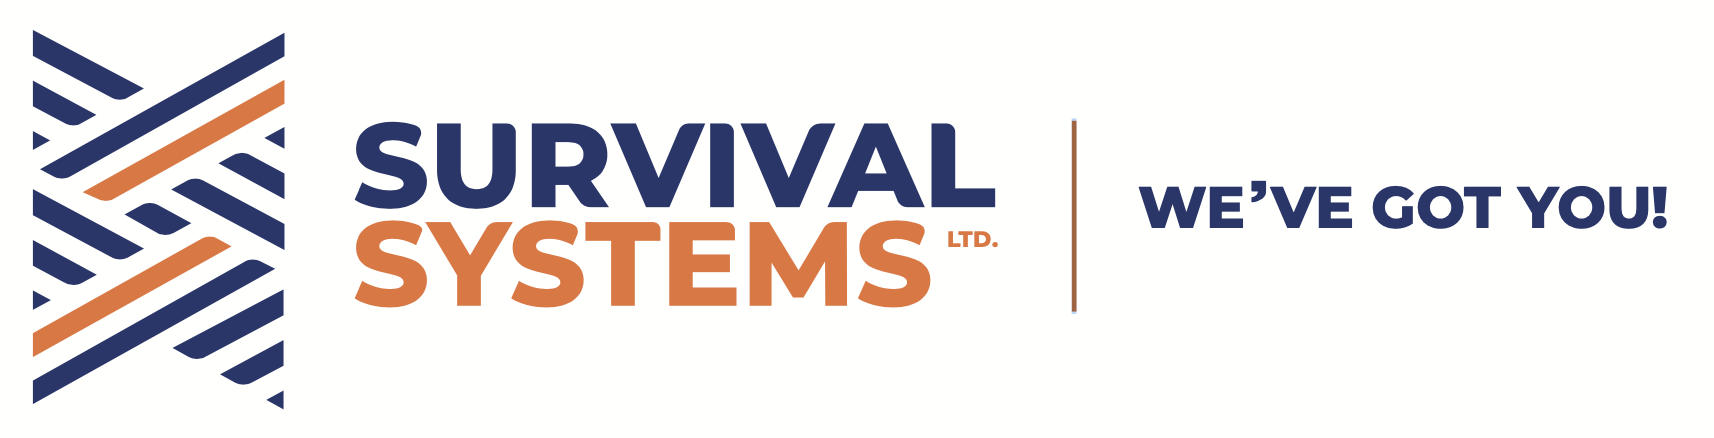 Survival Systems Limited